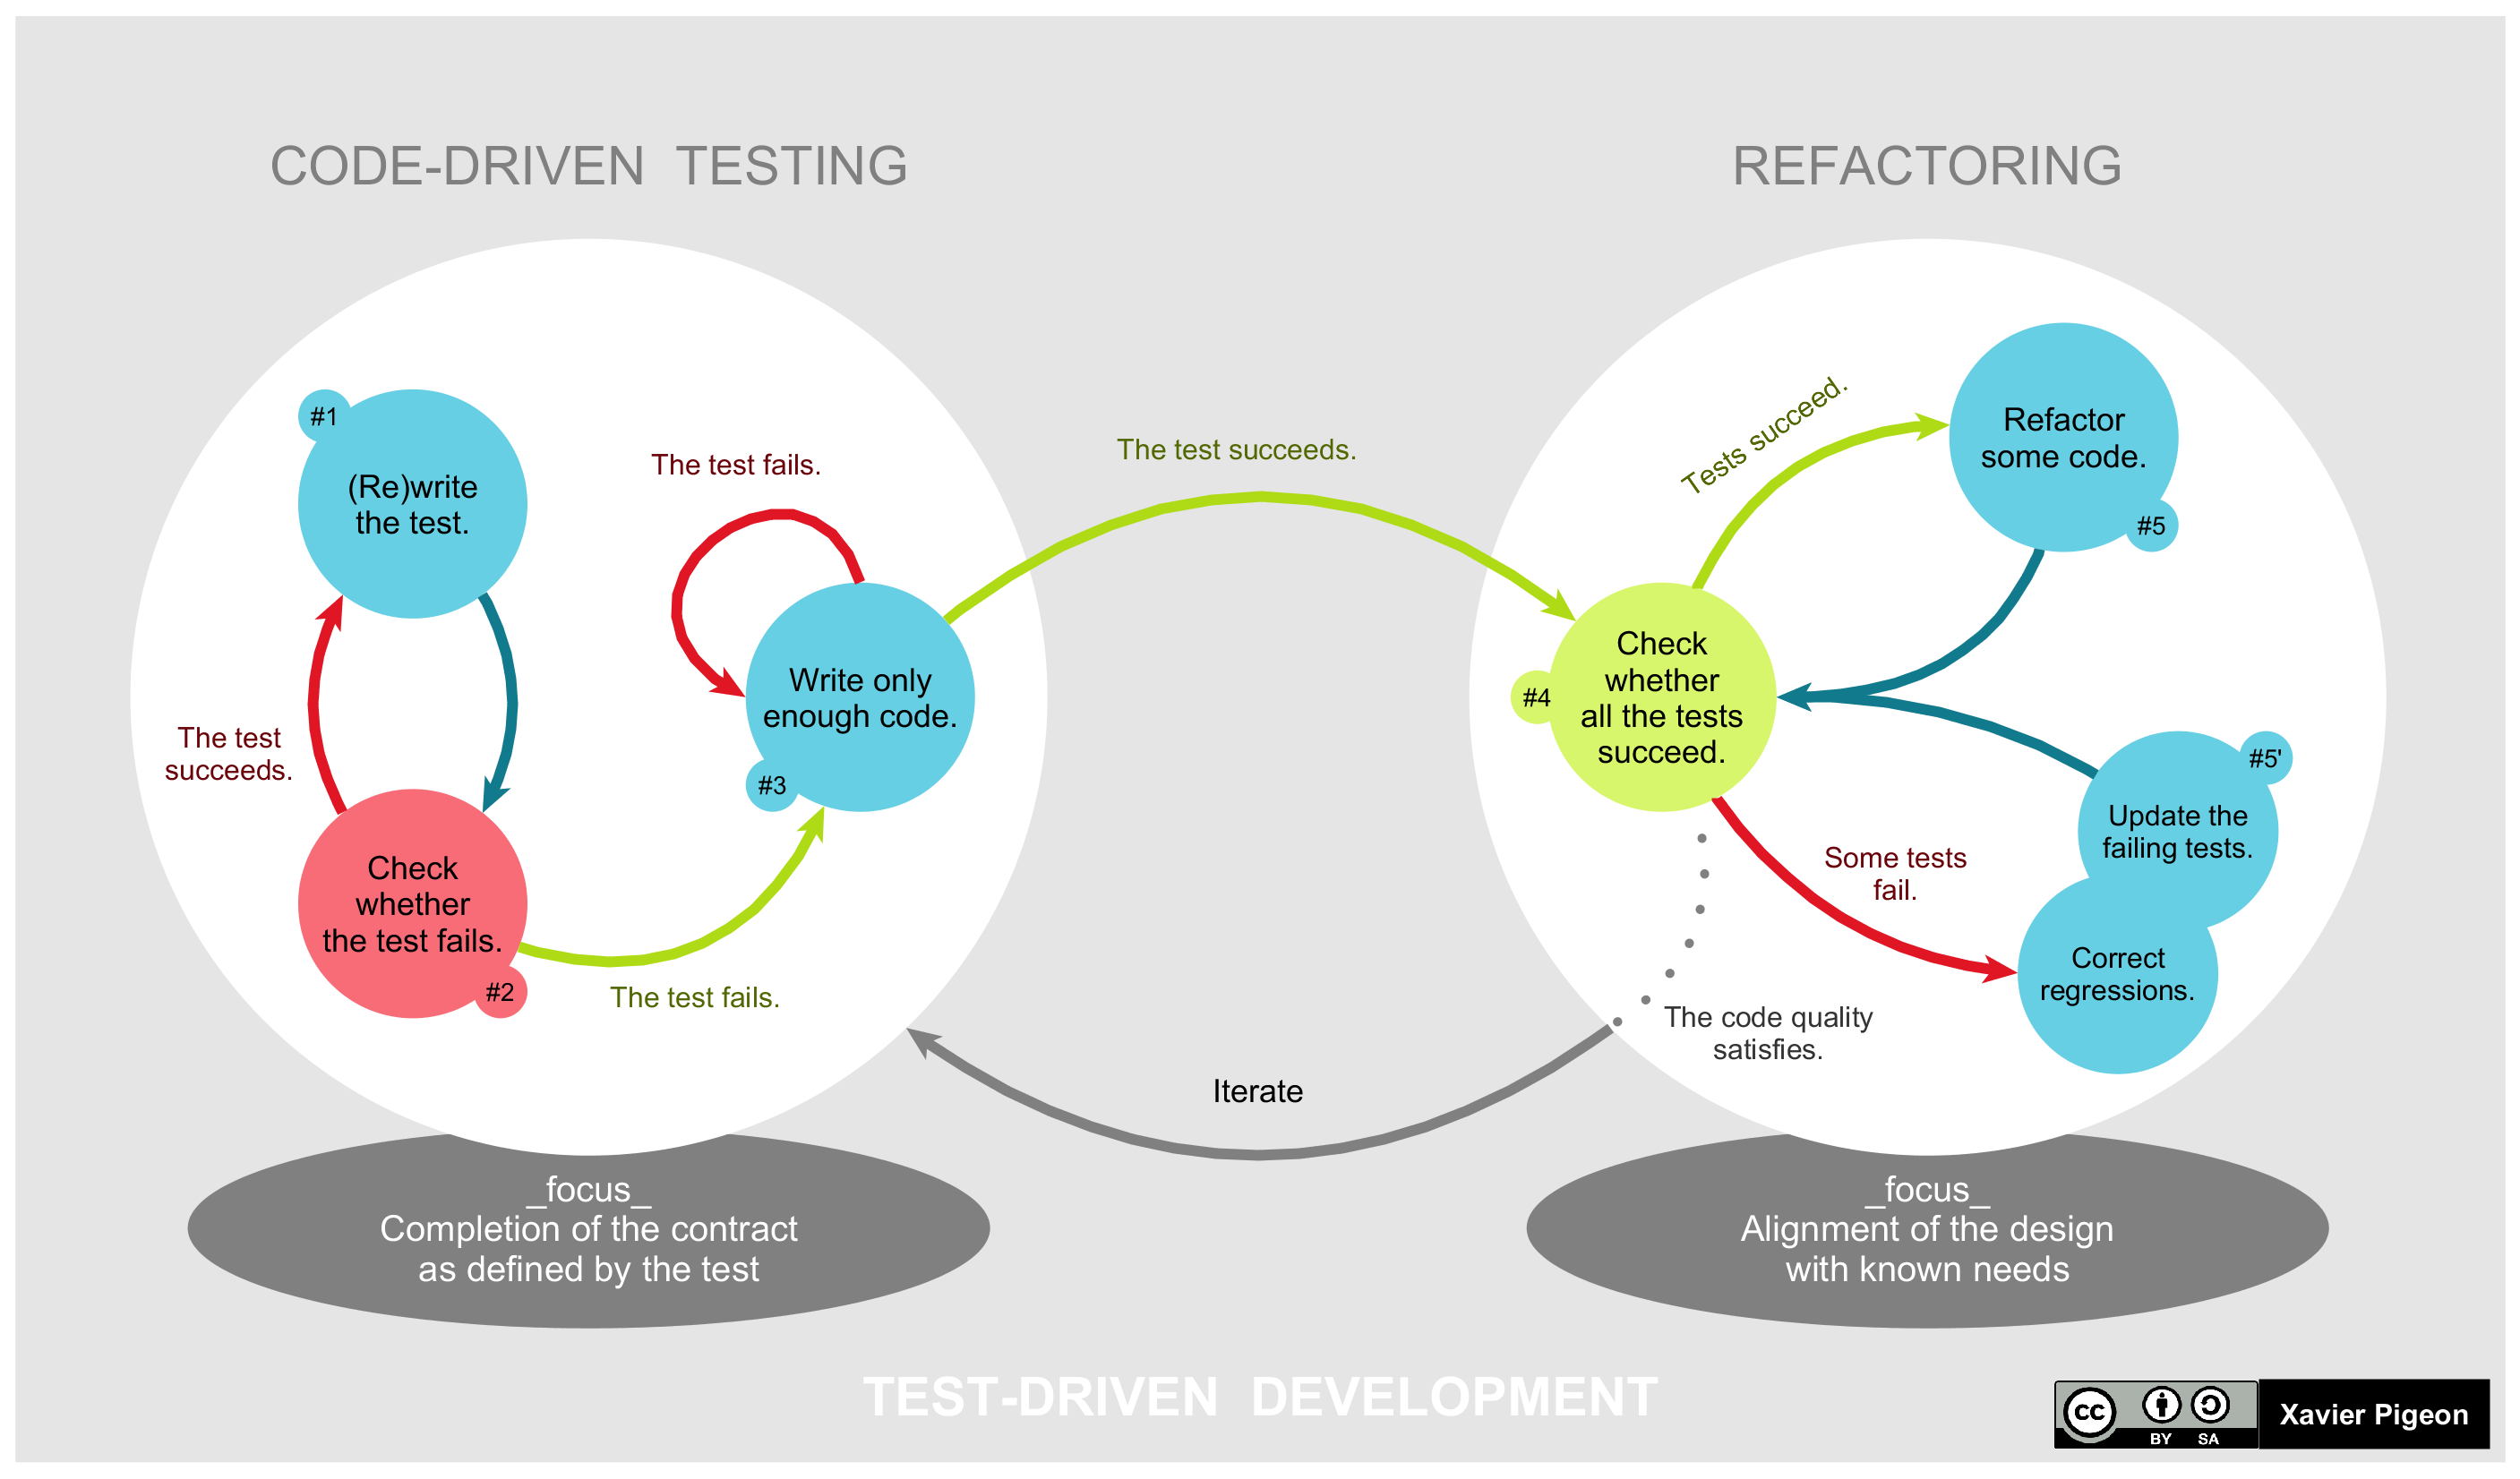 Lifecycle of the Test-Driven Development method. Fuente: Wikipedia